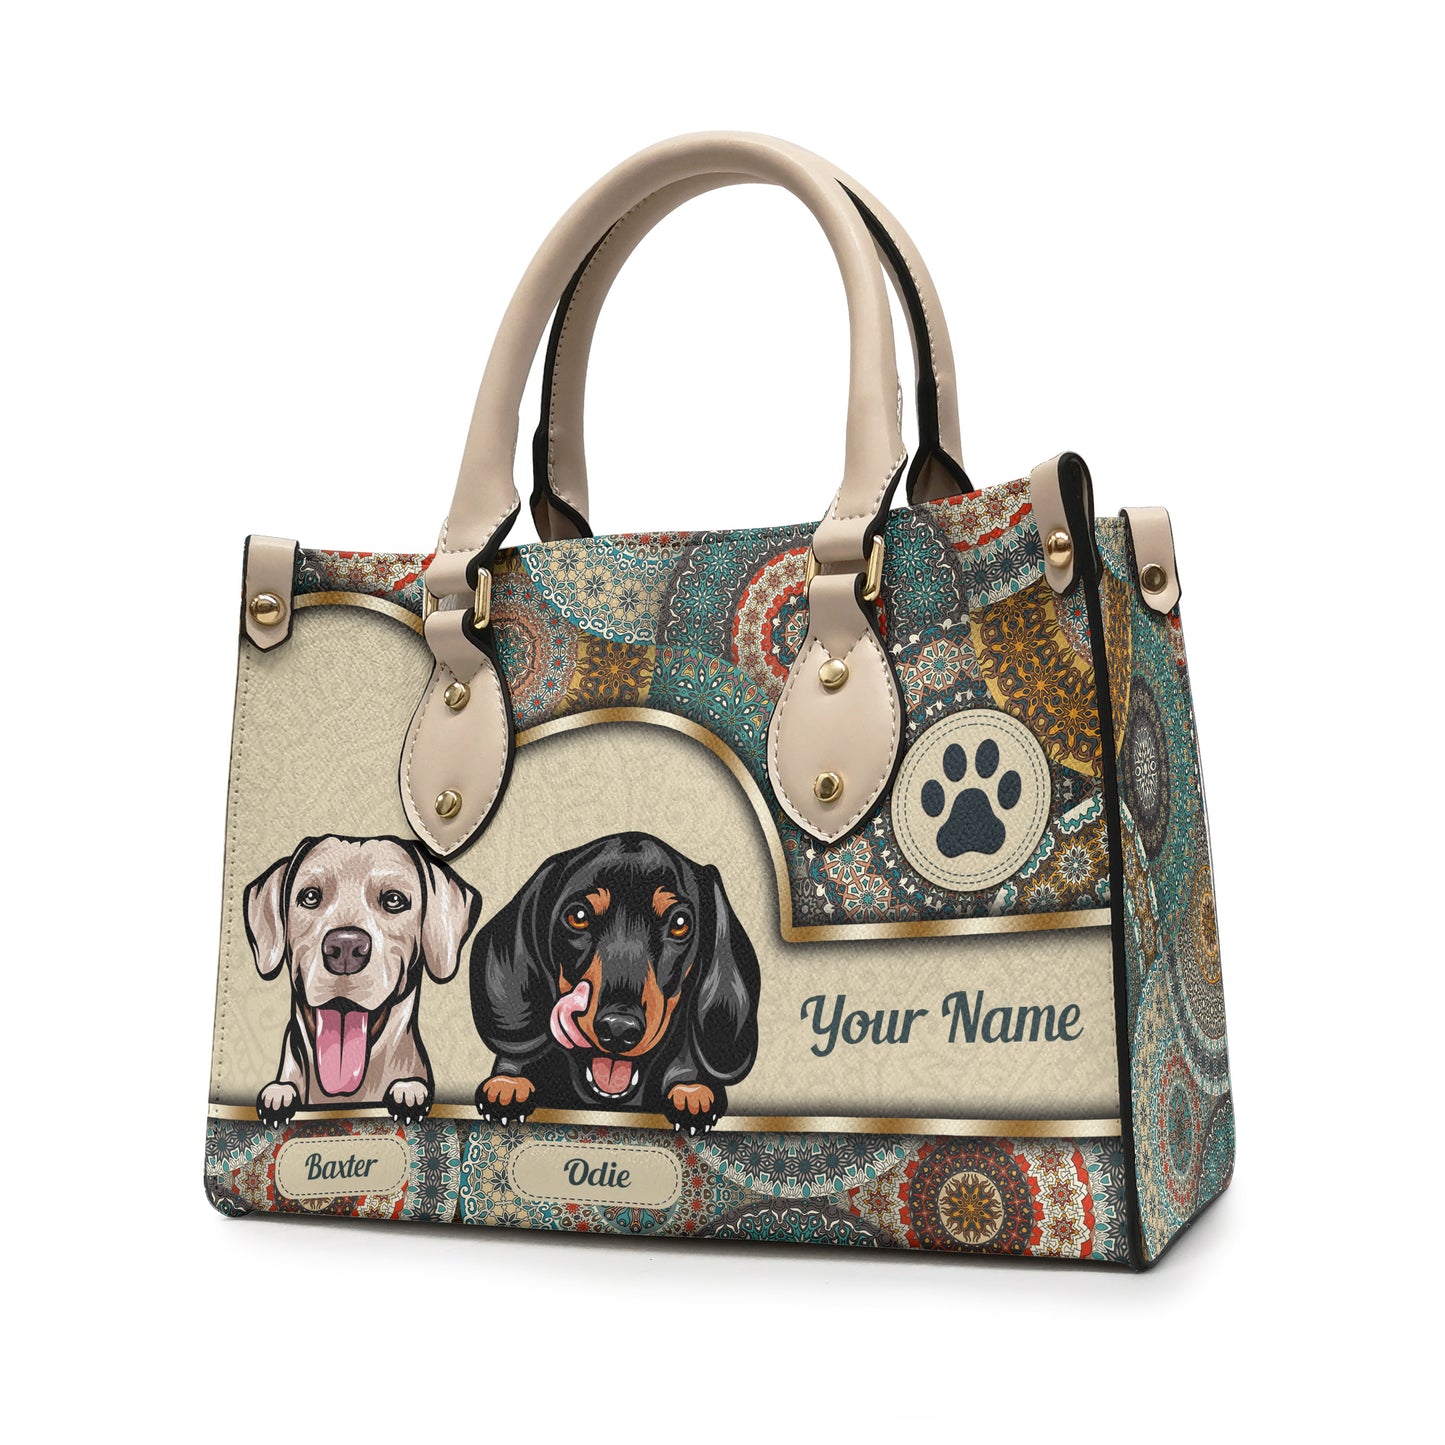 Funny Dog - Personalized Leather Bag - Birthday Gift For Dog Mom, Dog Lover, Wife, Besties